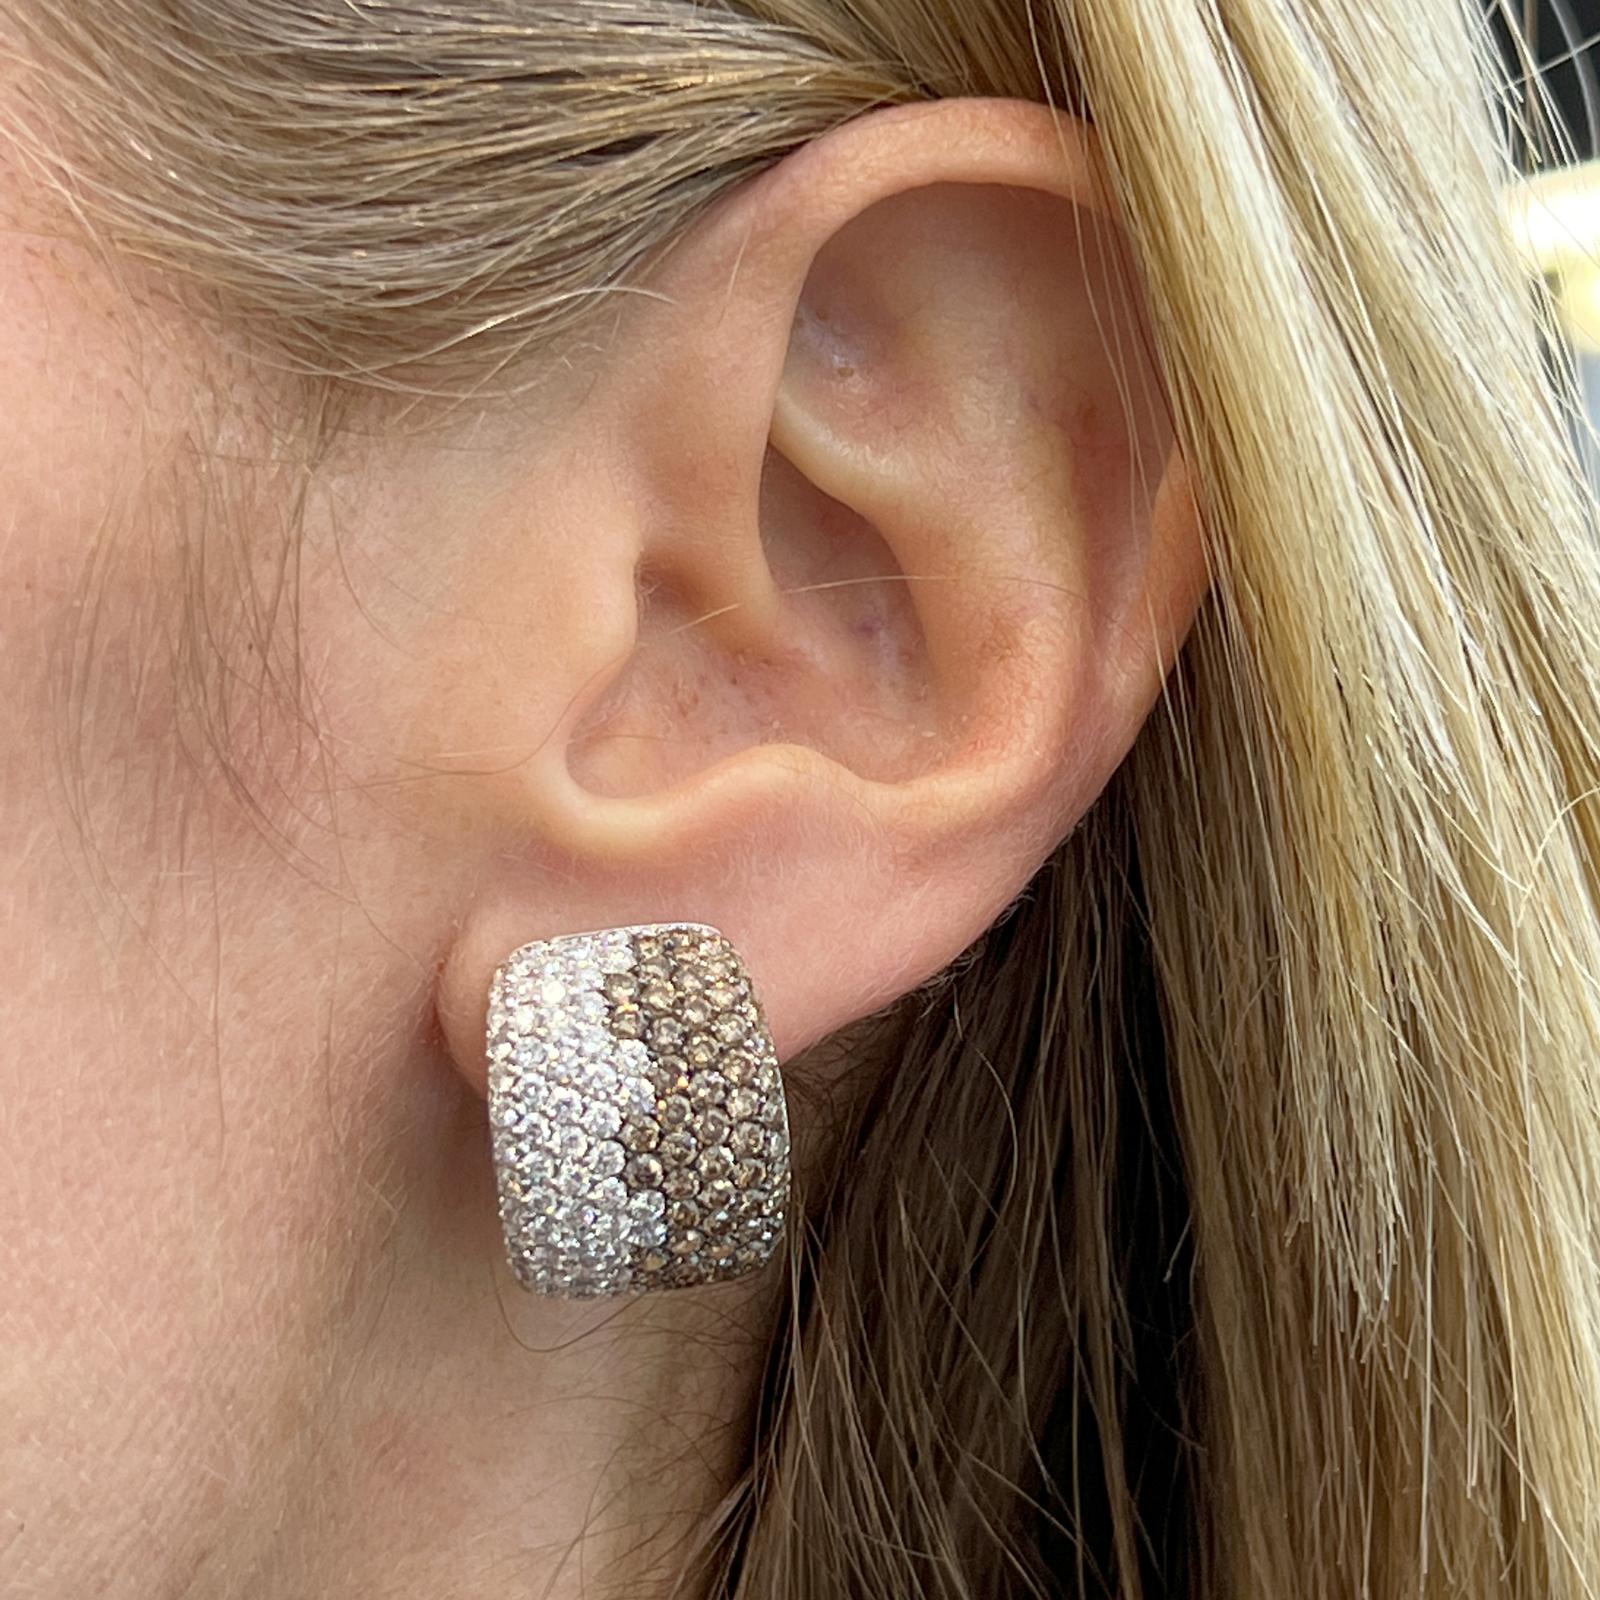 Stunning Italian diamond earrings crafted in 18 karat white gold. The earrings feature 224 round brilliant cut white diamonds weighing approximately 6.72 CTW and graded F-G color VS clarity. Another 224 champagne color diamonds weigh approximately